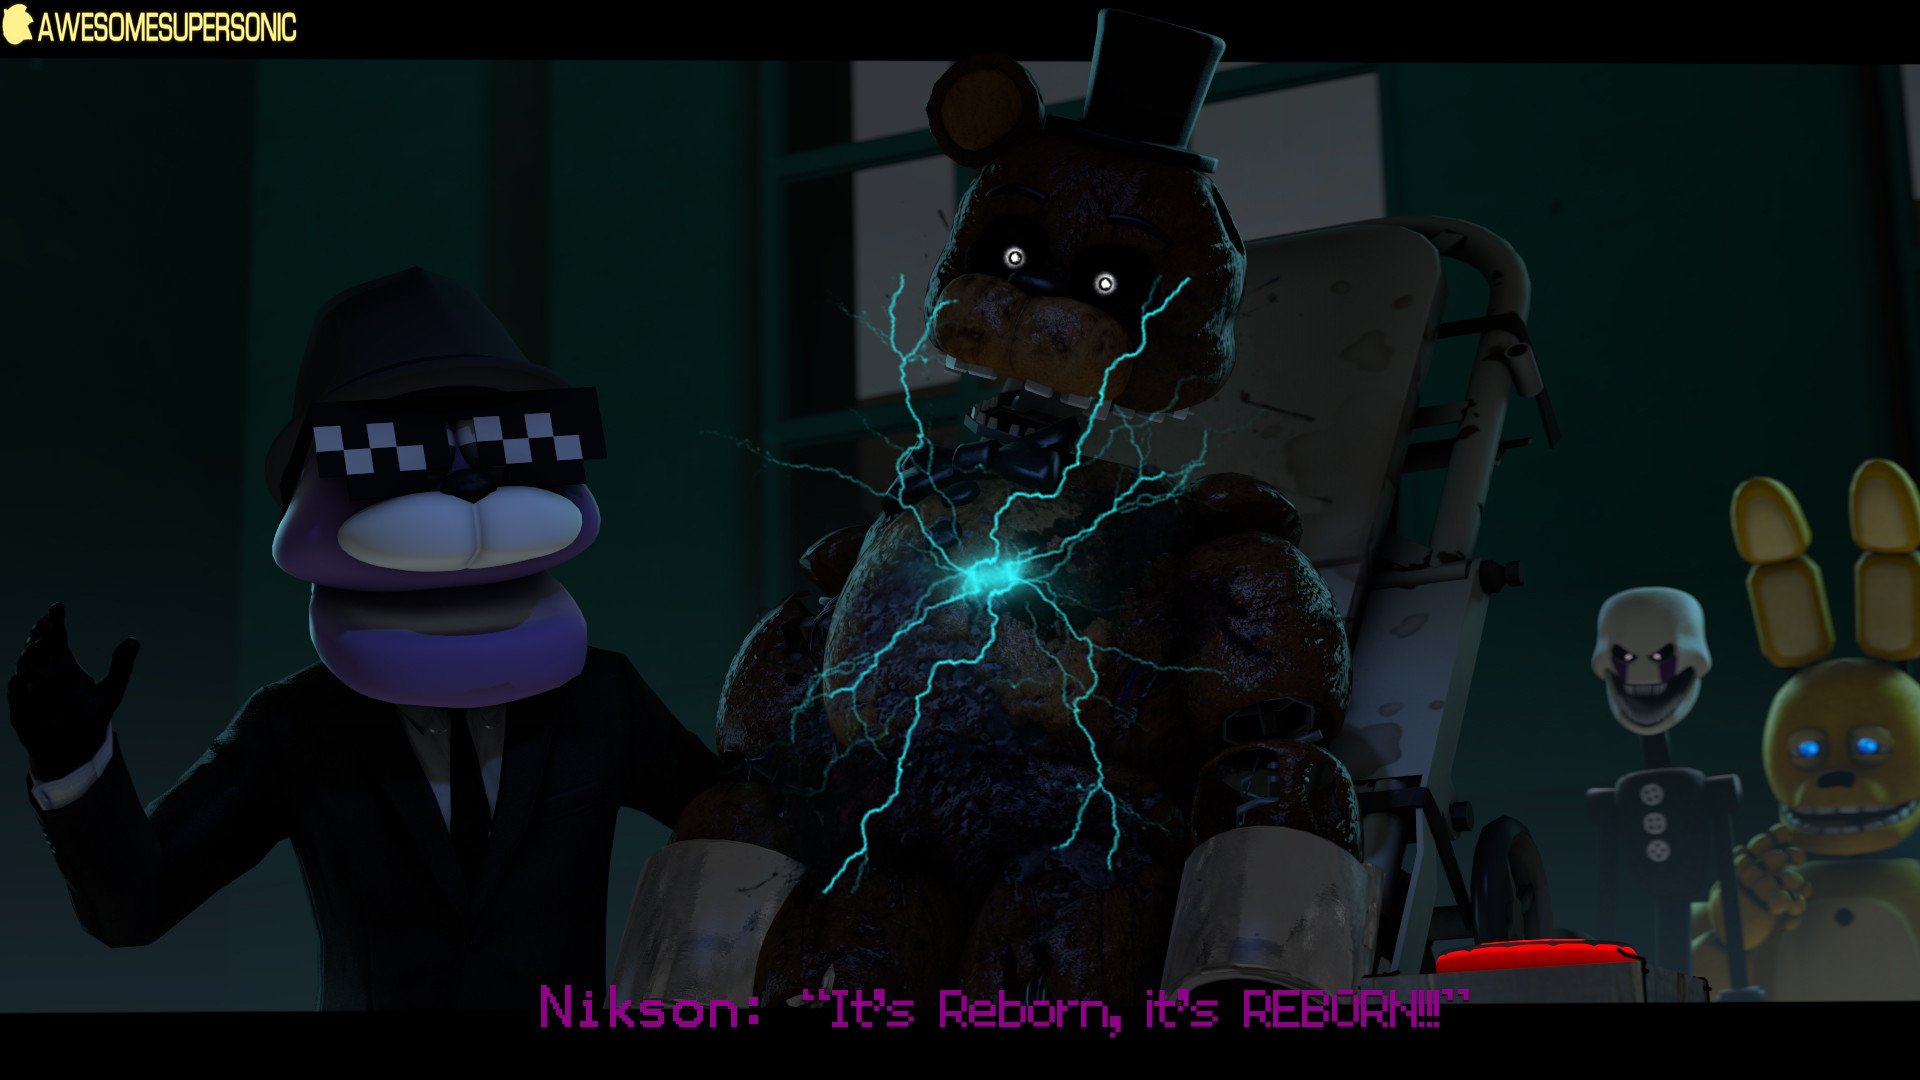 SFM FNaF It is reborn by AwesomeSuperSonic on DeviantArt